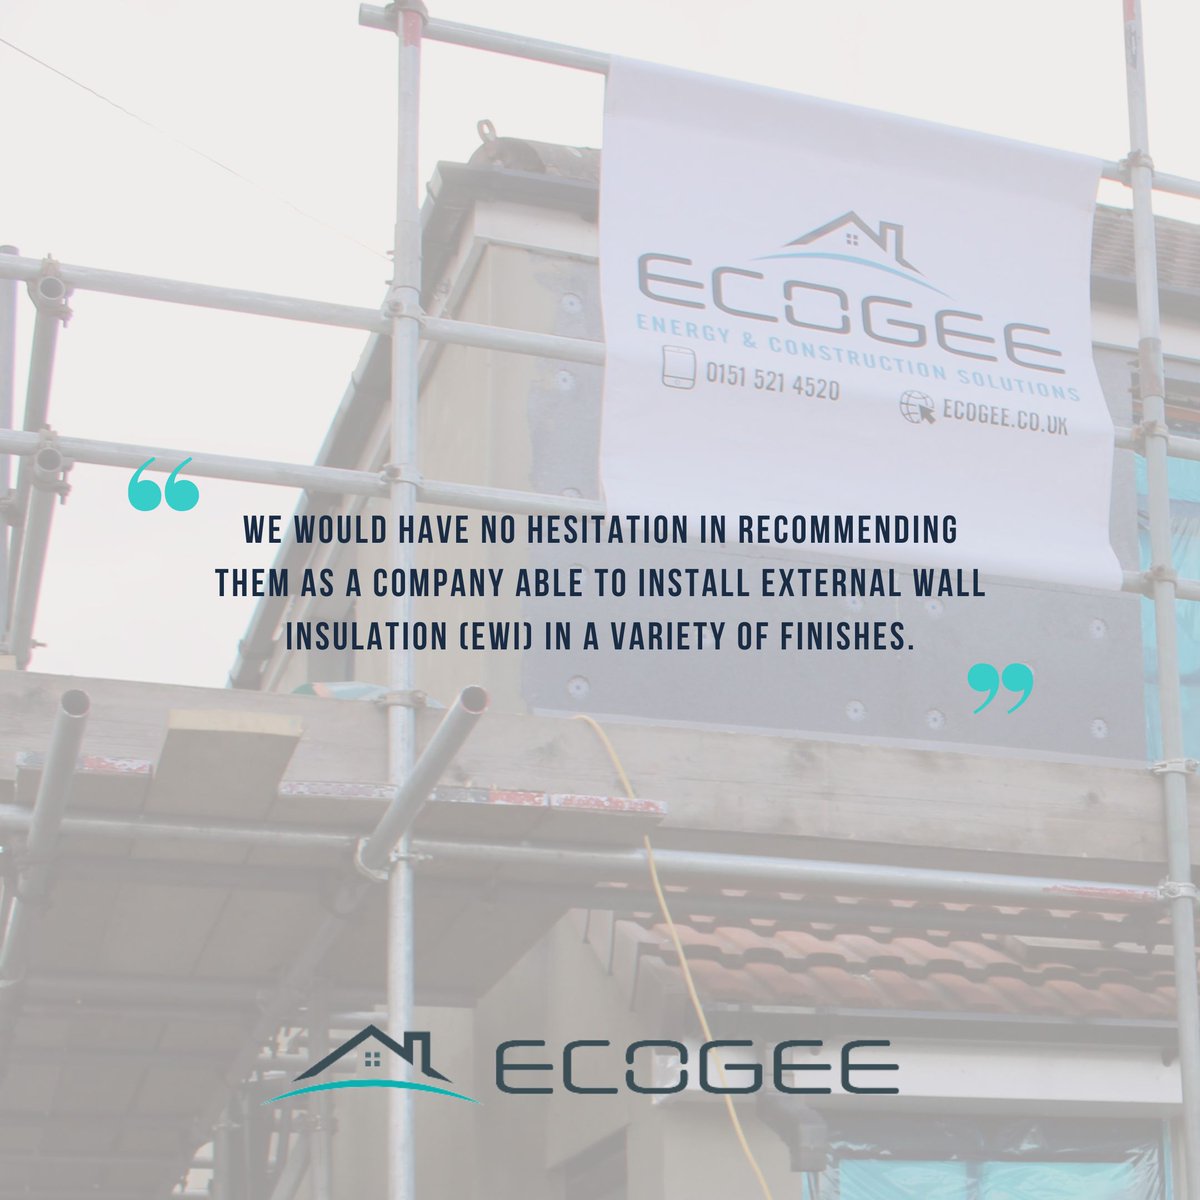 We’re ending our week with a fantastic review for the Ecogee team on our External Wall Insulation work 😃

“We would have no hesitation in recommending them as a company able to install External Wall Insulation (EWI) in a variety of finishes.” - M. Weaver. 

#Ecogee #ECO